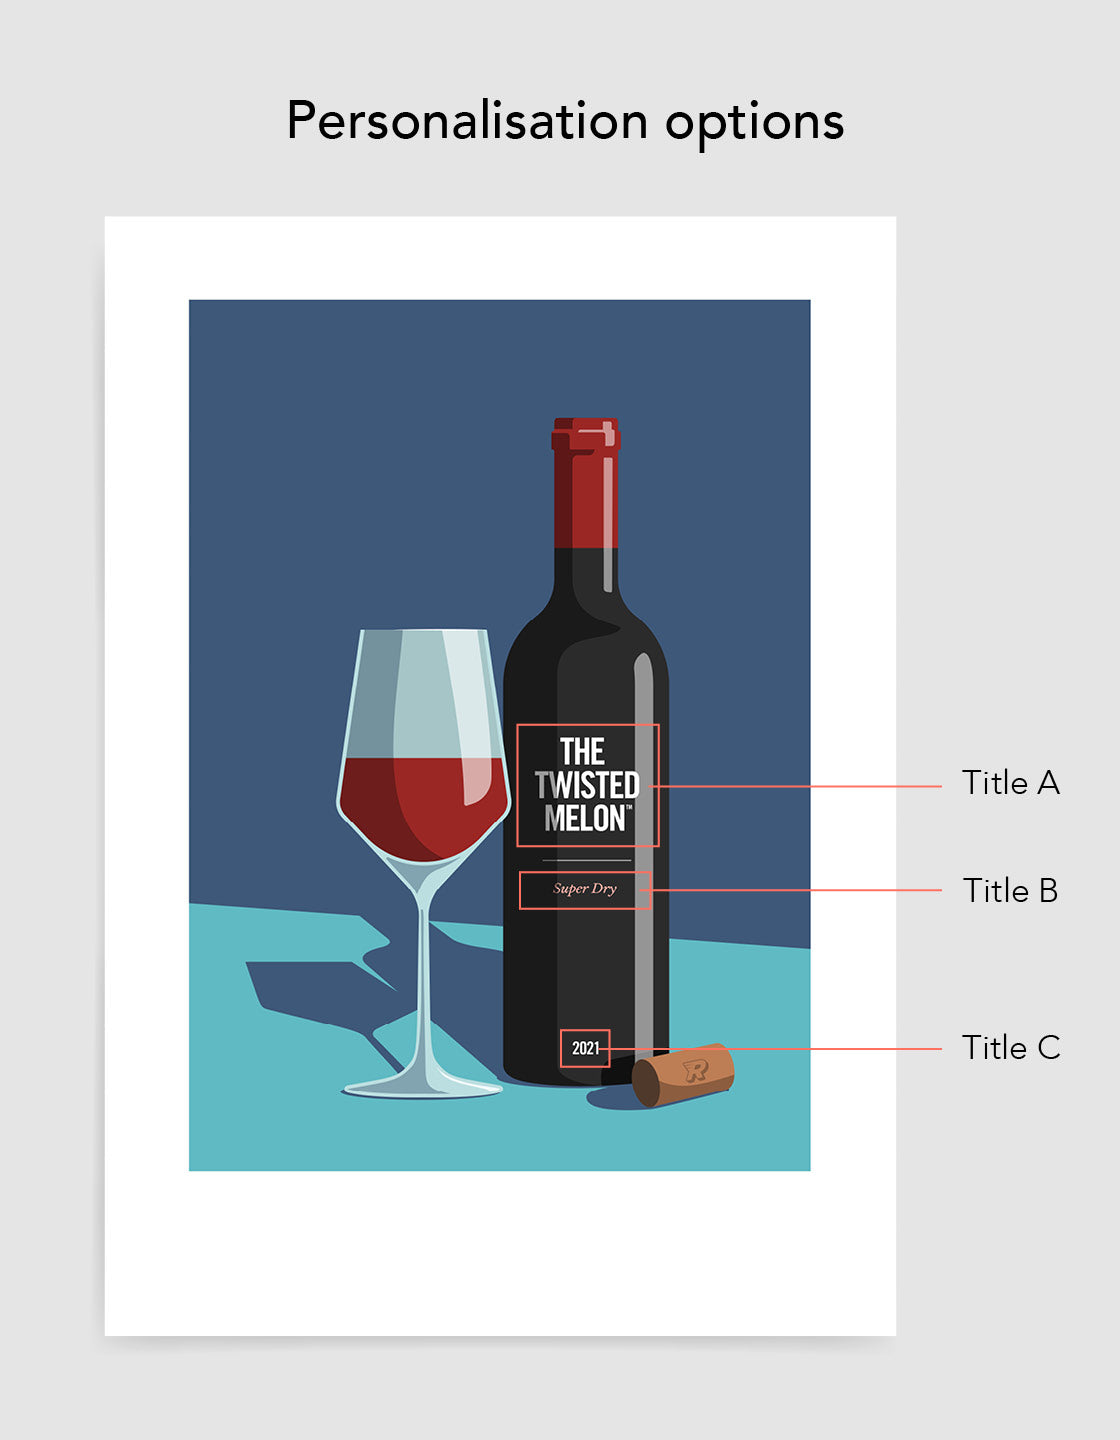 Minimal art print showing a wine glass half filled with red wine stood next to a bottle with white text. A cork lays on the side. Print has a dark blue background in the top two thirds and a turquoise background for the bottom third